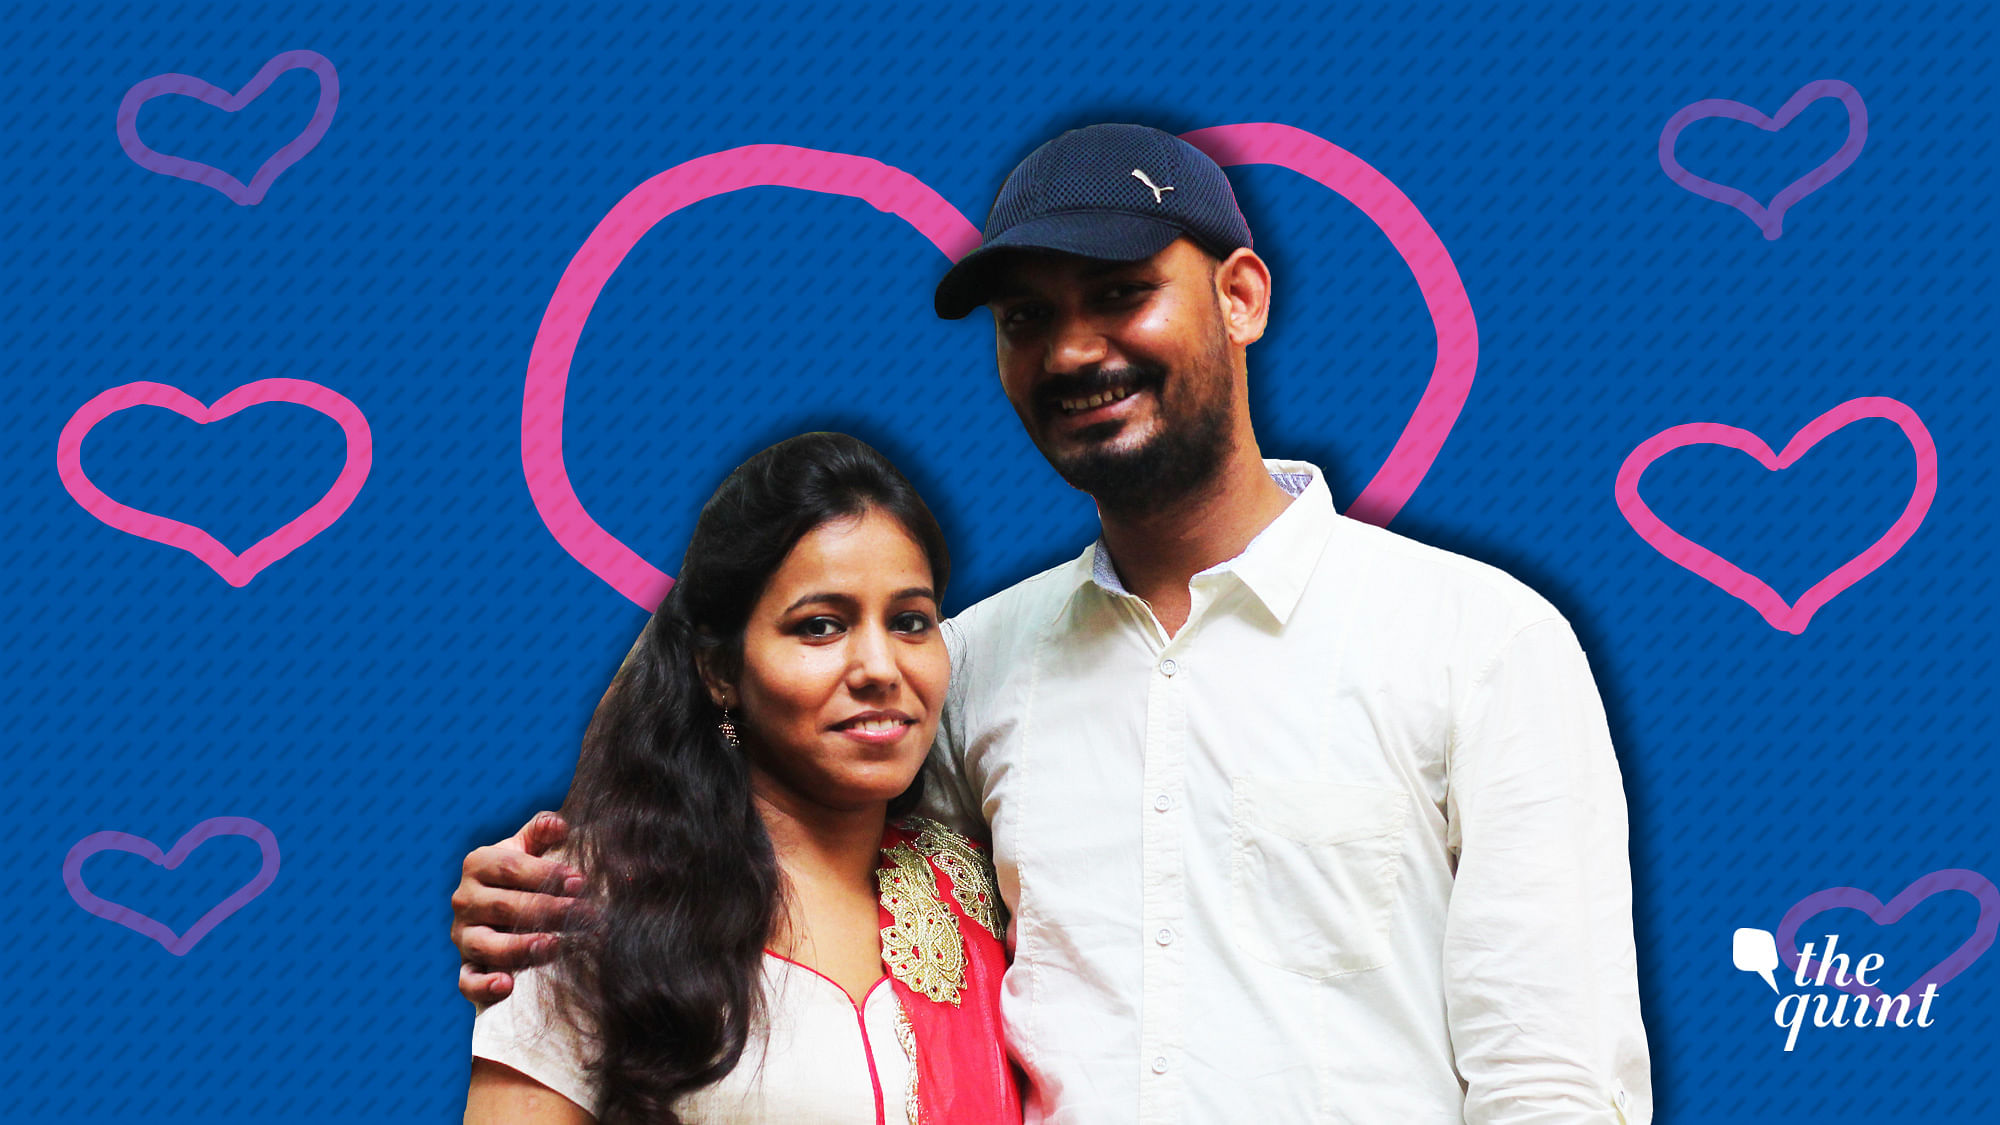 Sumit and Azra met in college and fell in love. They got married even though they faced opposition from their parents.